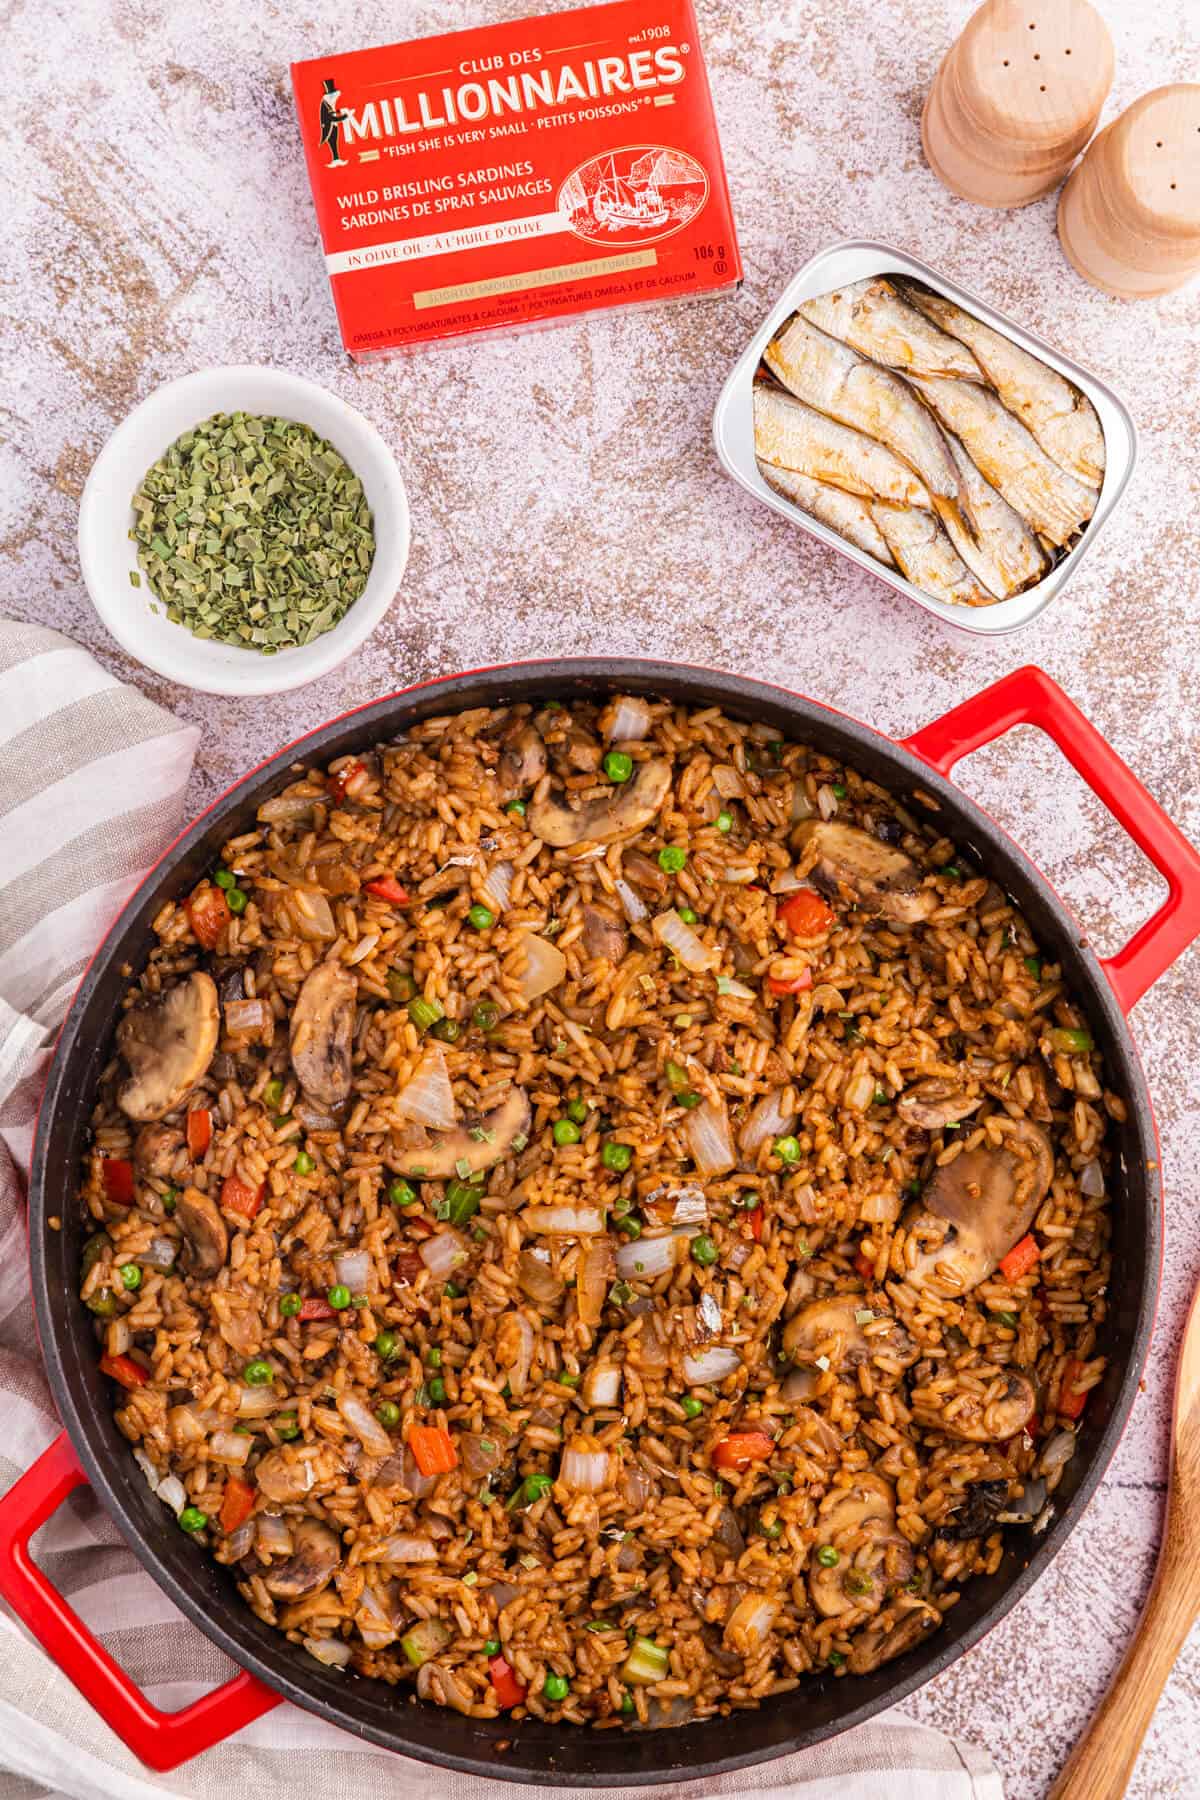 Sardine fried rice in a red skillet.